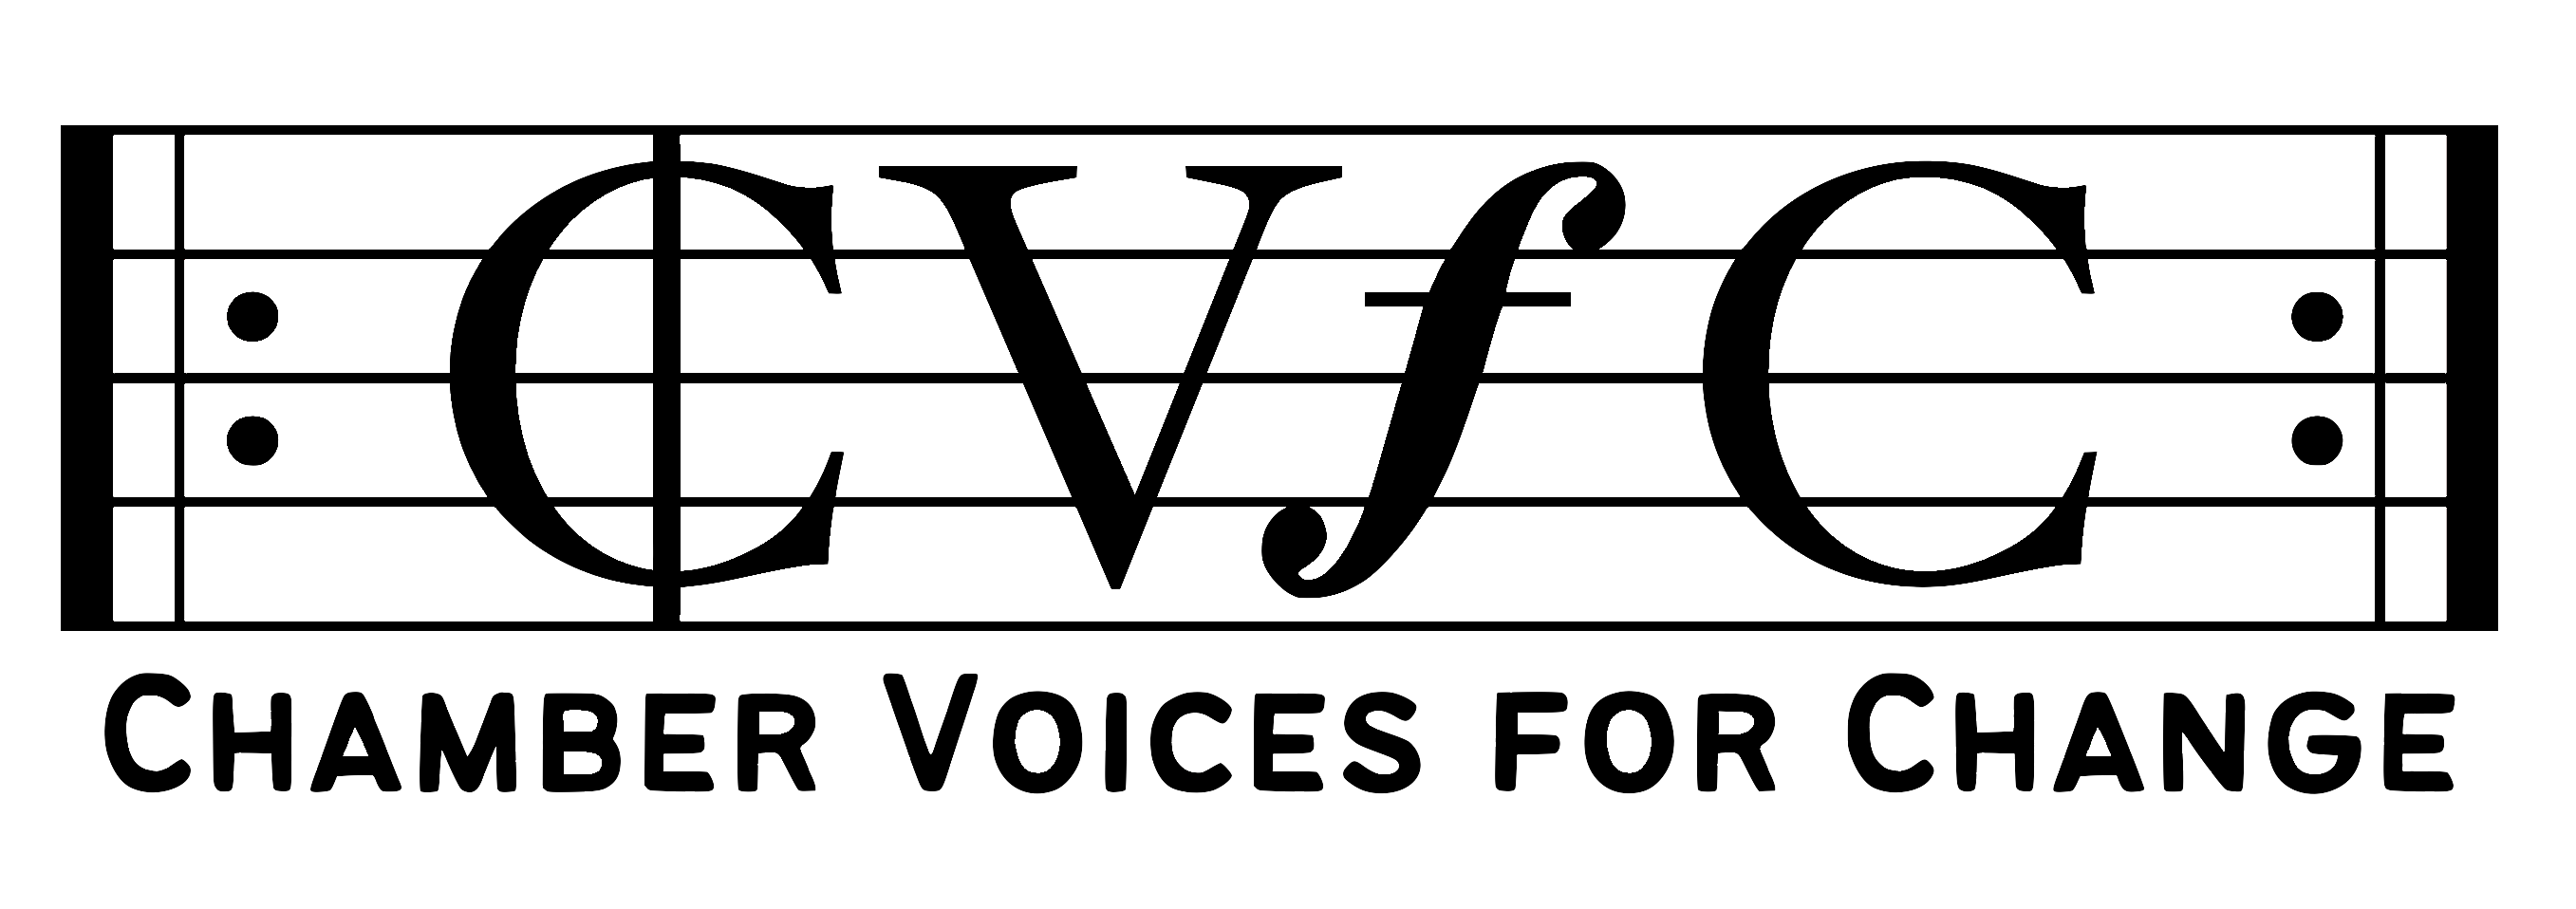 Chamber Voices for Change logo